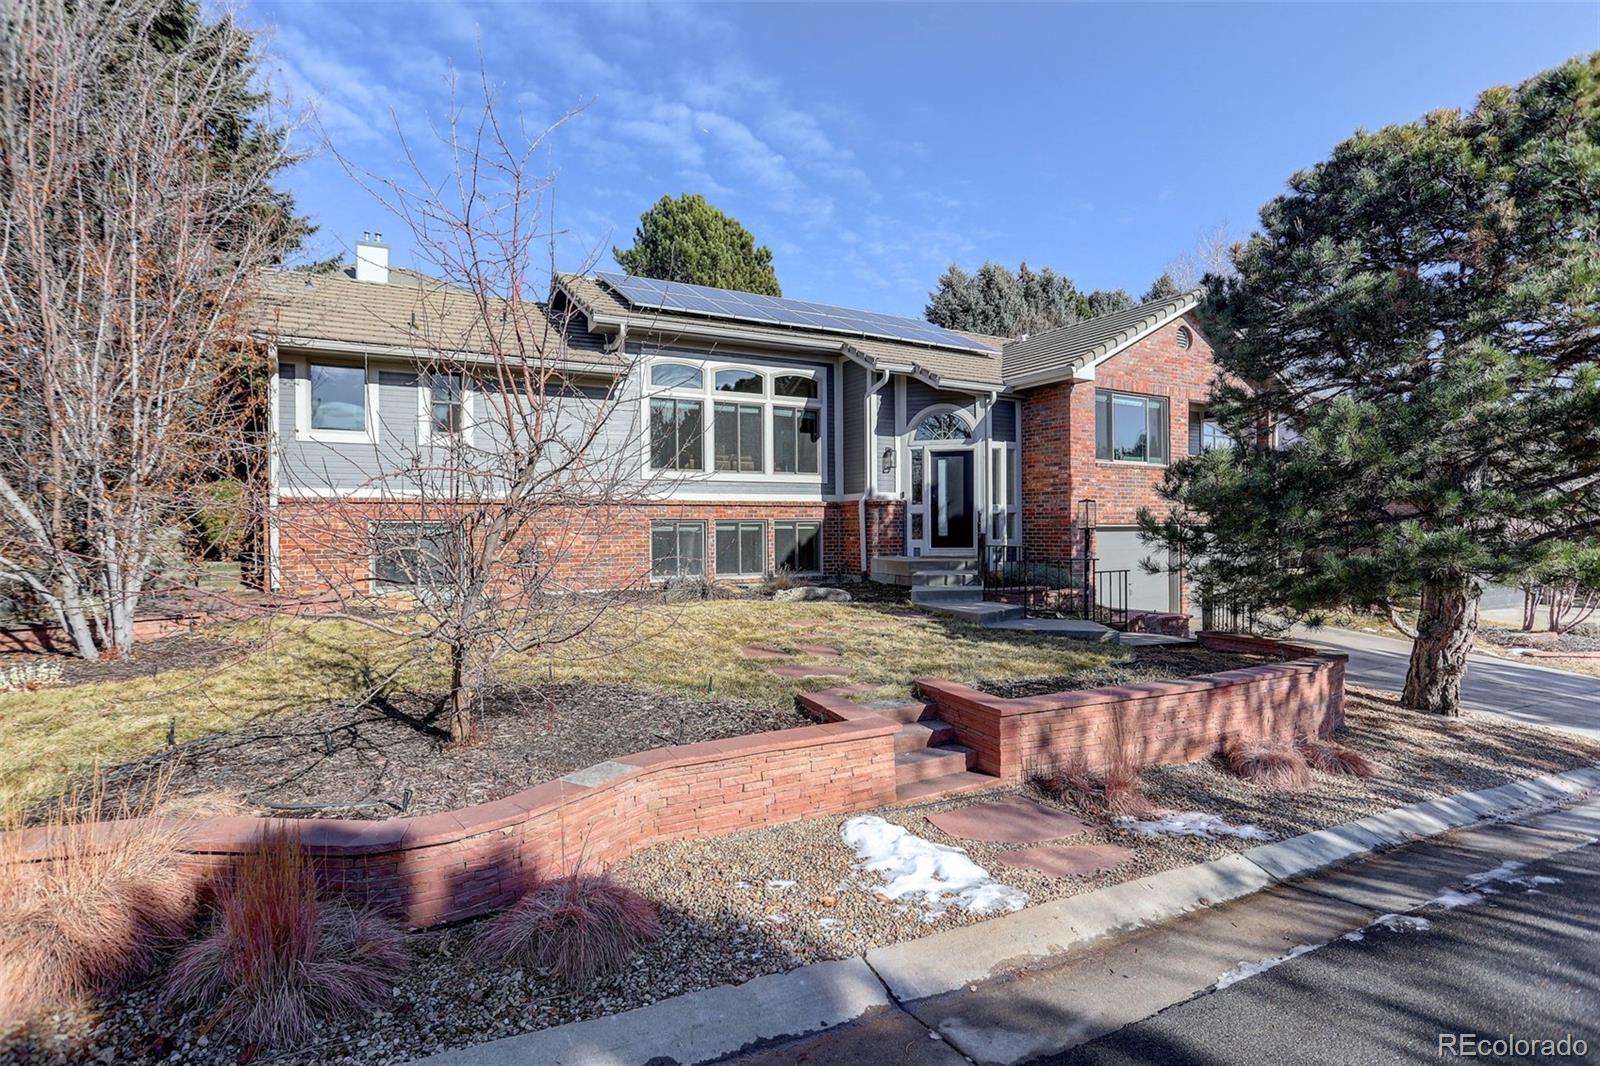 13815 W 58th Drive, arvada MLS: 8400524 Beds: 4 Baths: 3 Price: $1,050,000